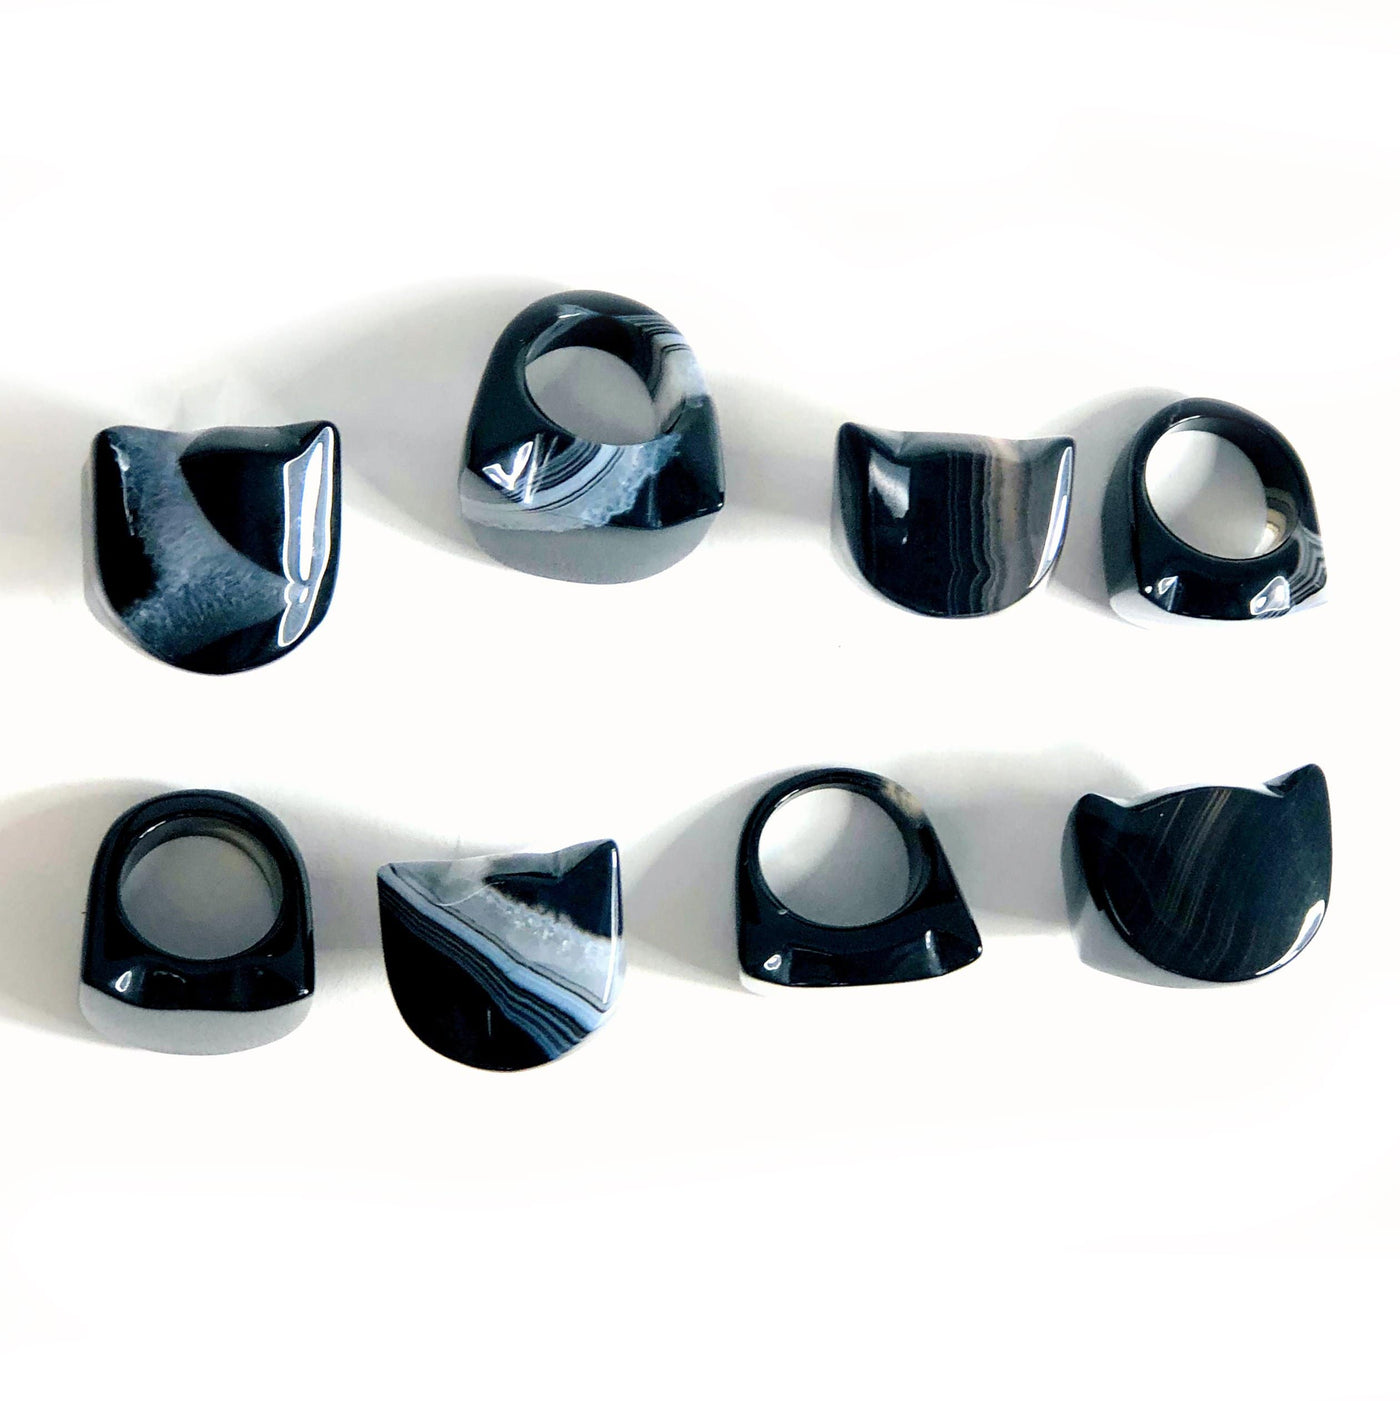 8 Black Agate Cat Polished Rings placed in 2 rows showing size and color difference